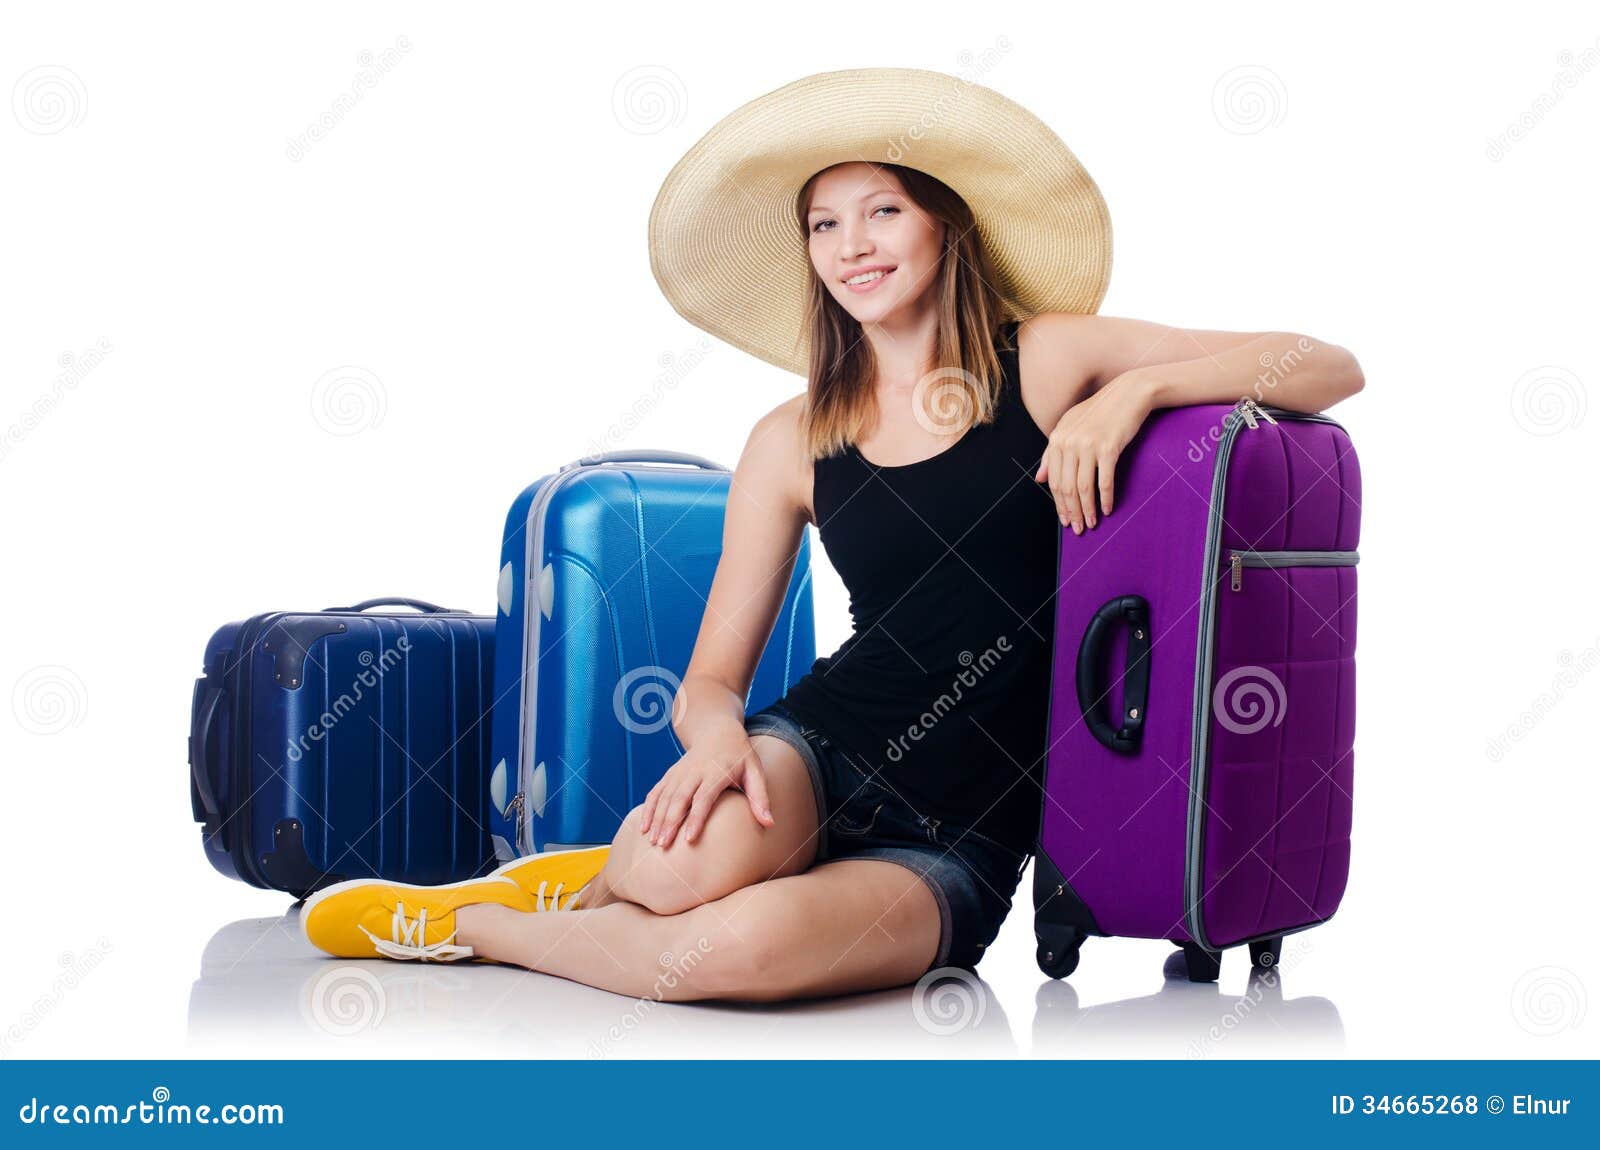 girl travel stock images